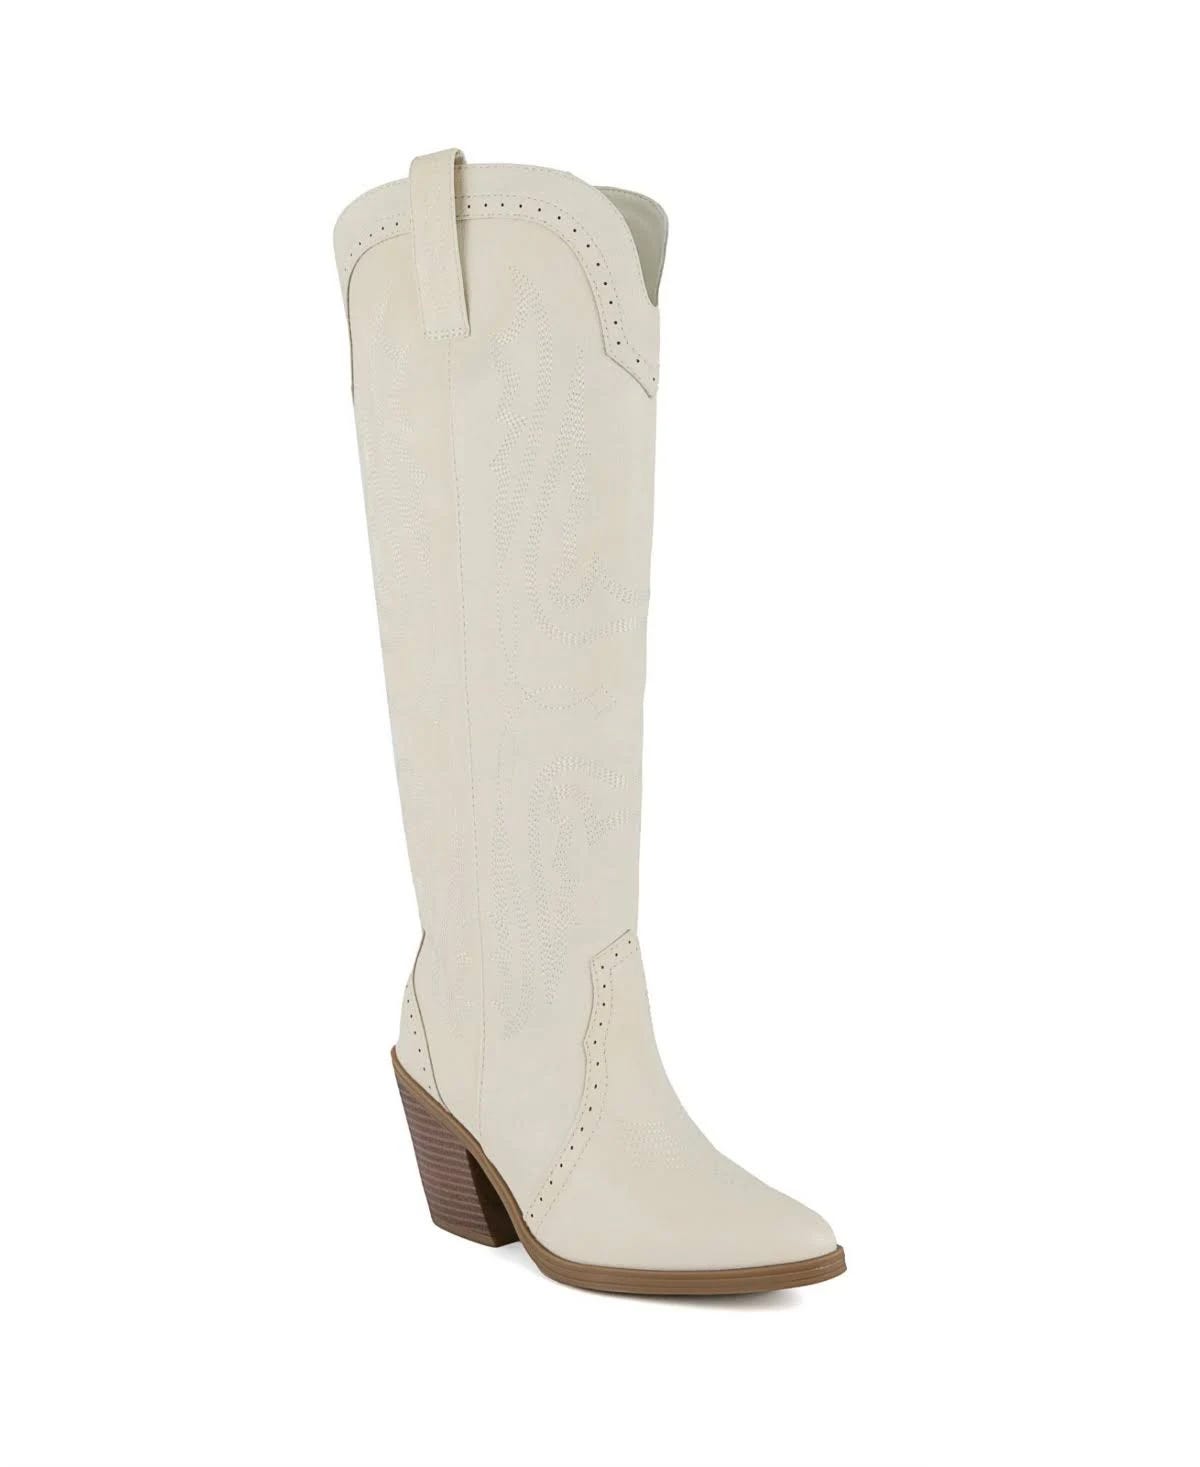 Stylish Western Boots with High Heel for Women - Size 9, White | Image